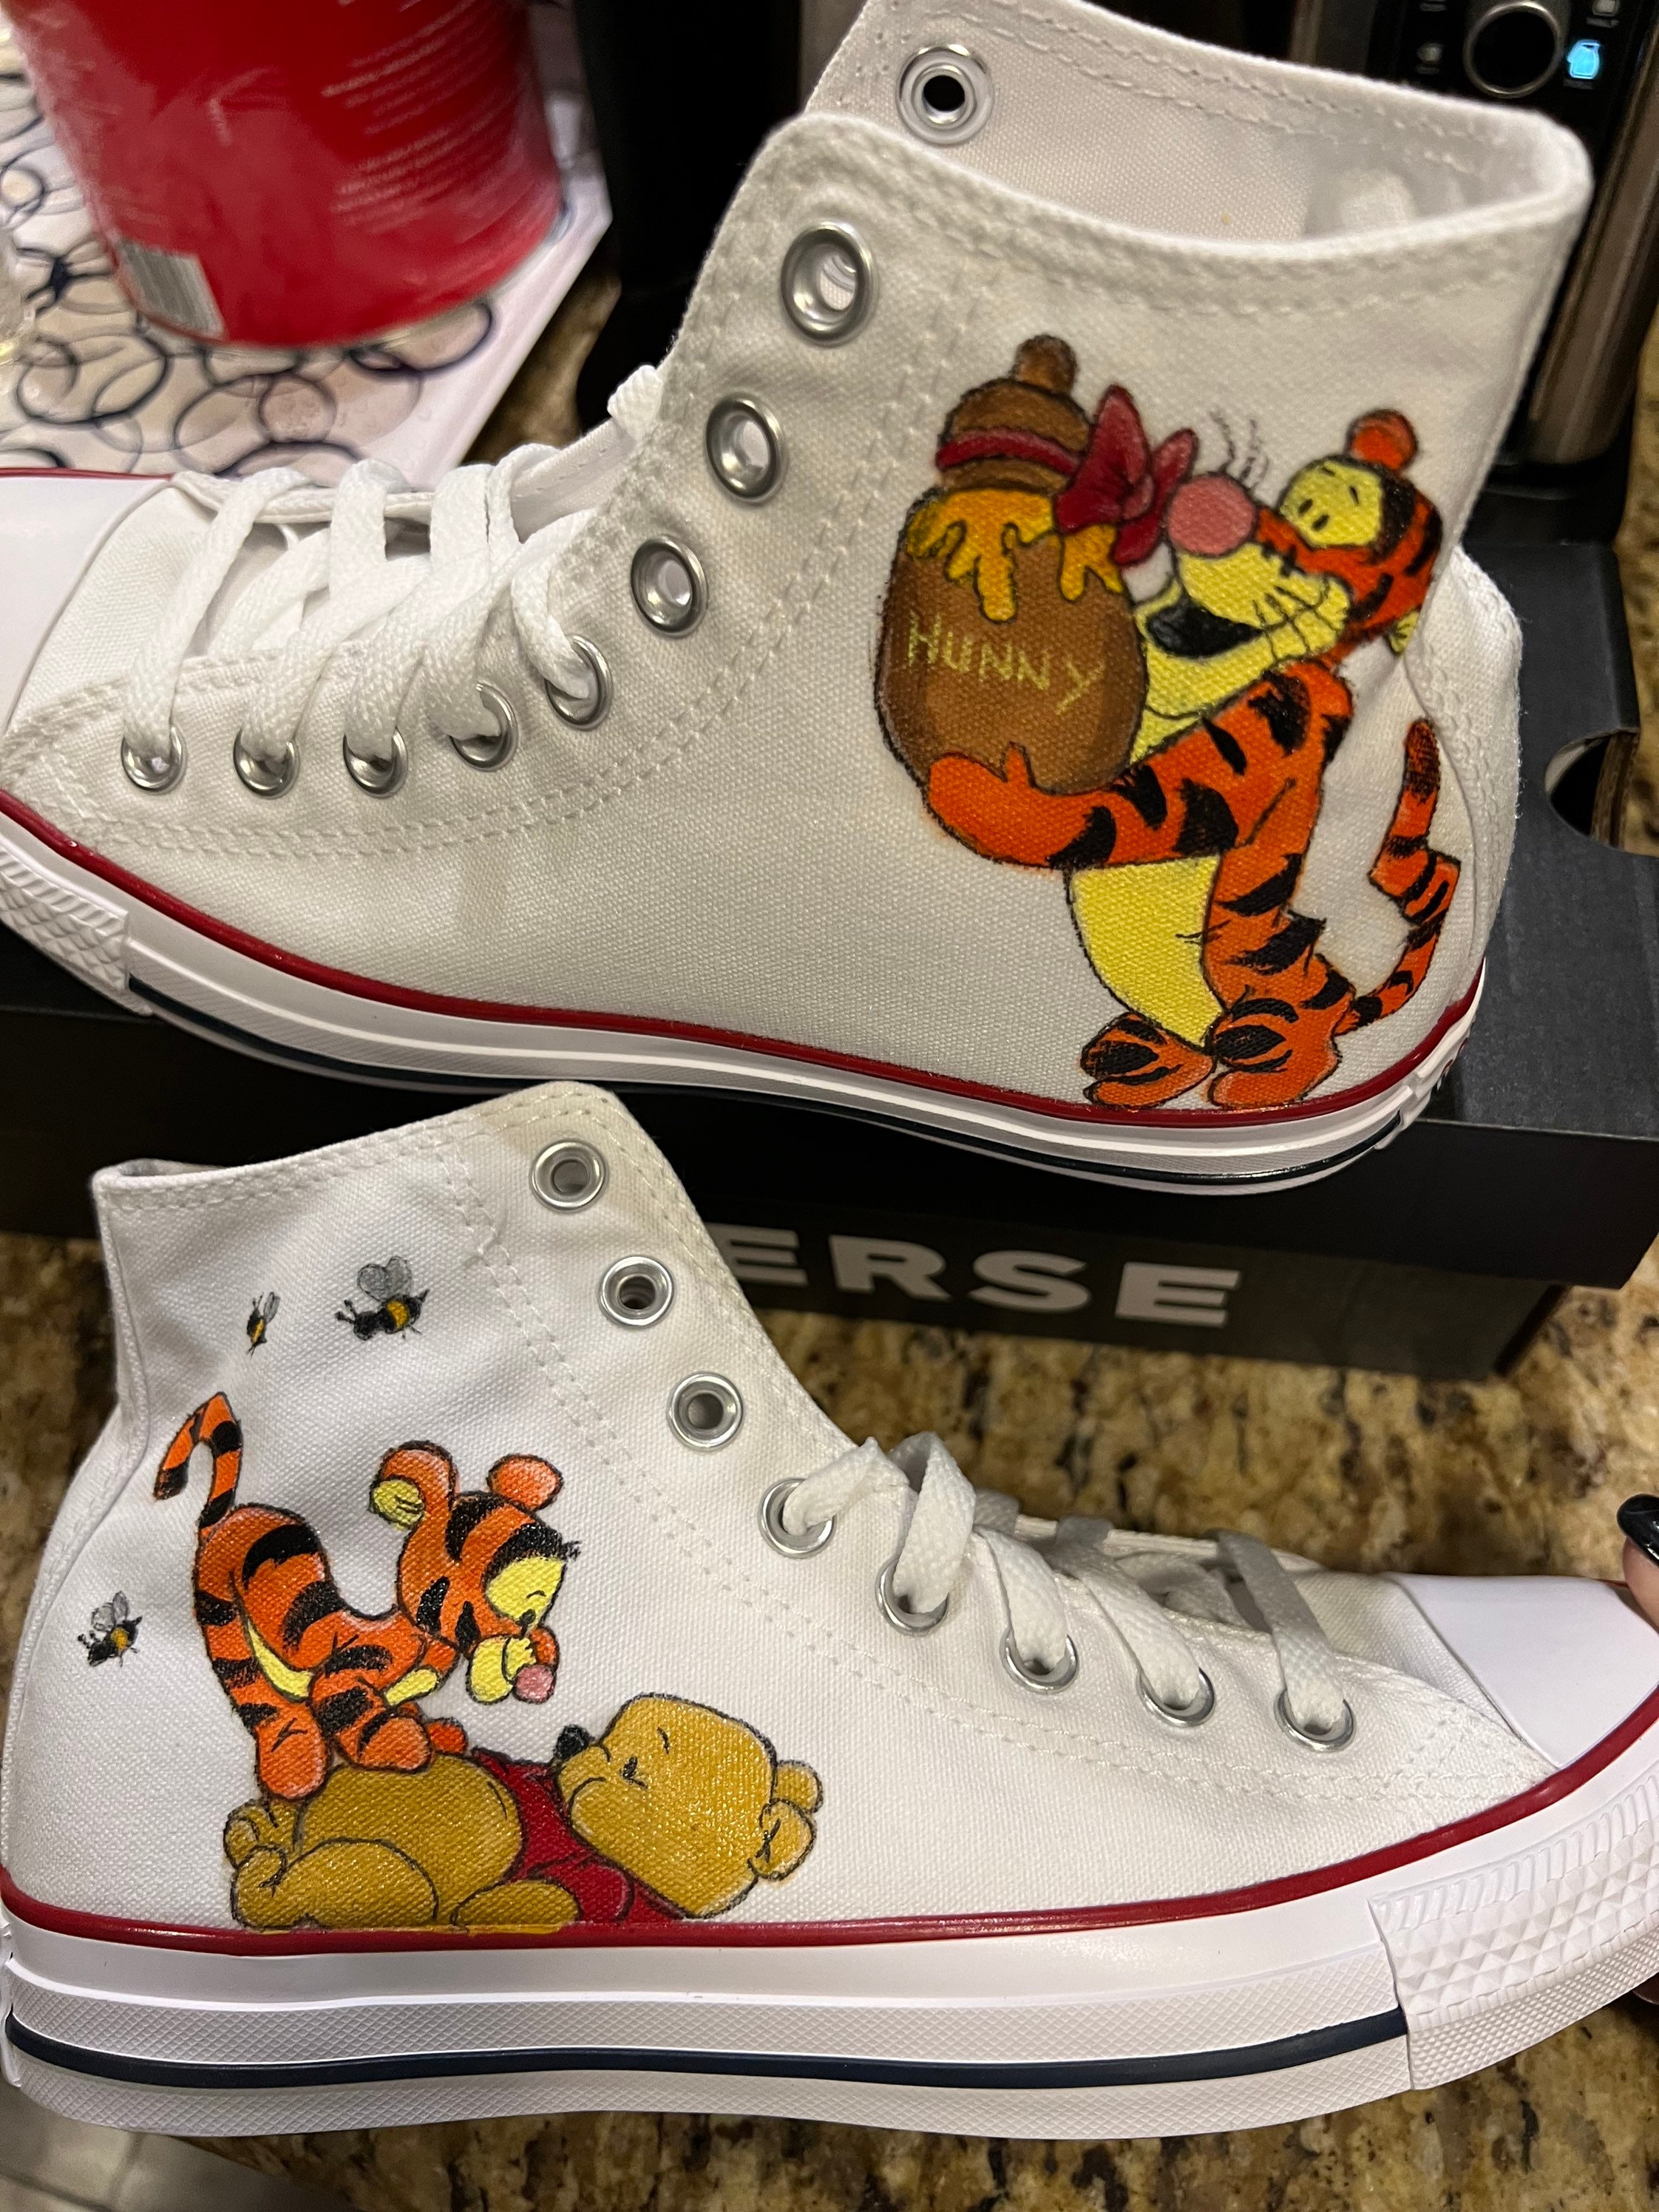 Converse Branded Custom Hand Painted Shoes Disney's 